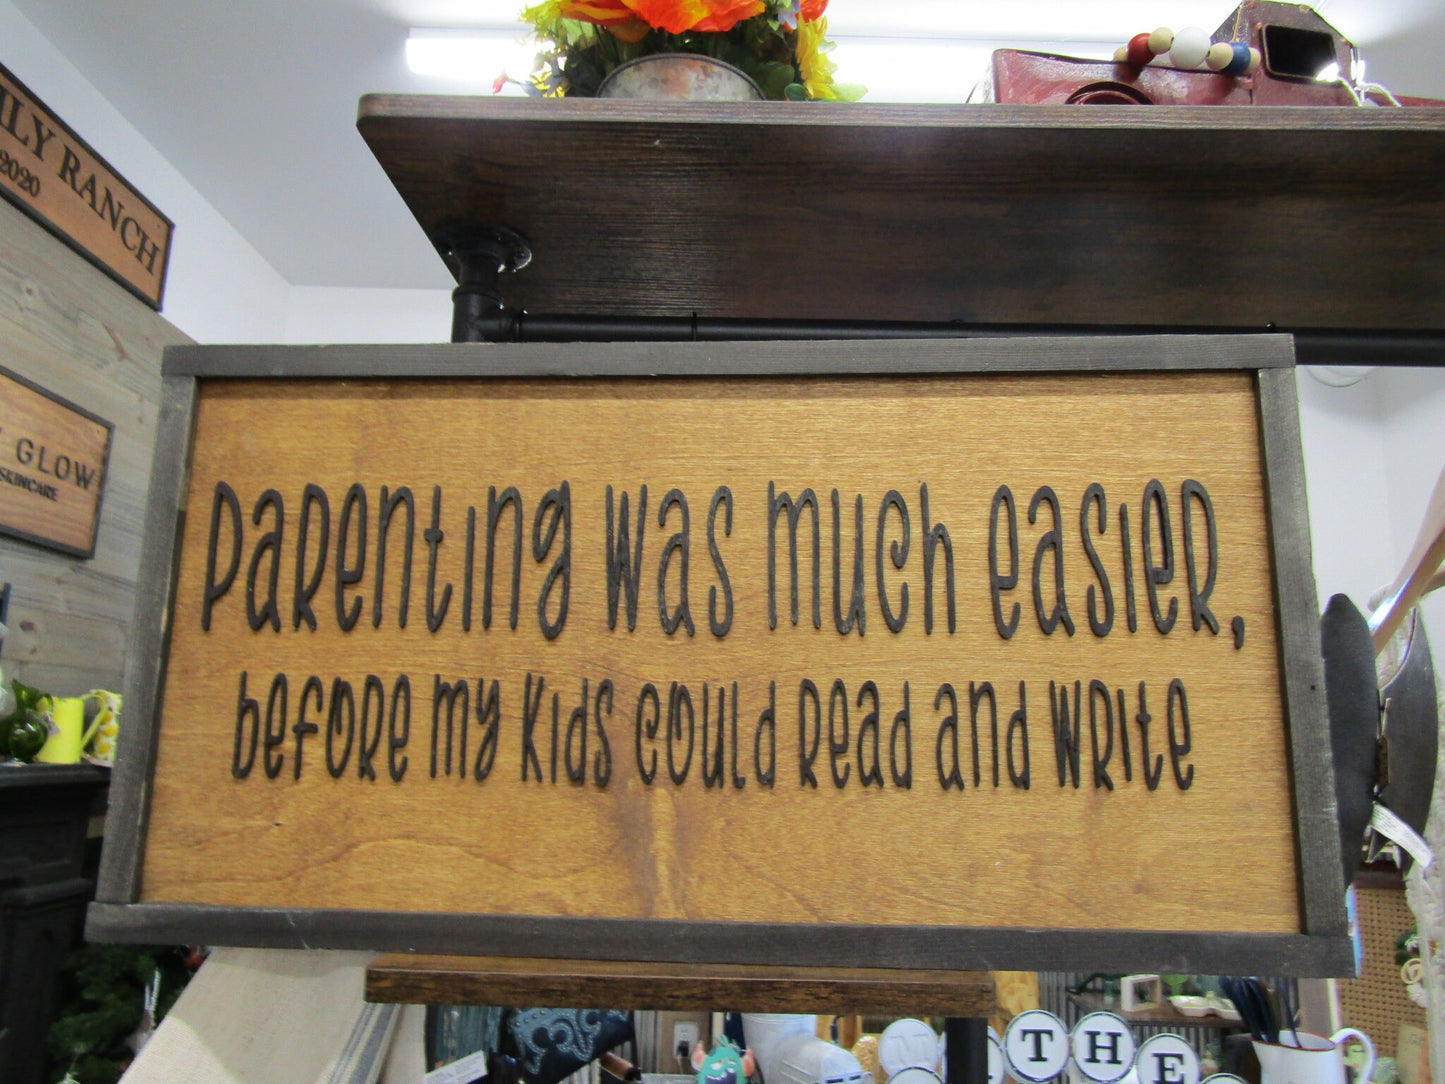 Parenting Funny Easy Parenting Relatable Home Decor Wooden Handmade Sign 3D Kids Parenting was Easier Before Kids could Read Teenager